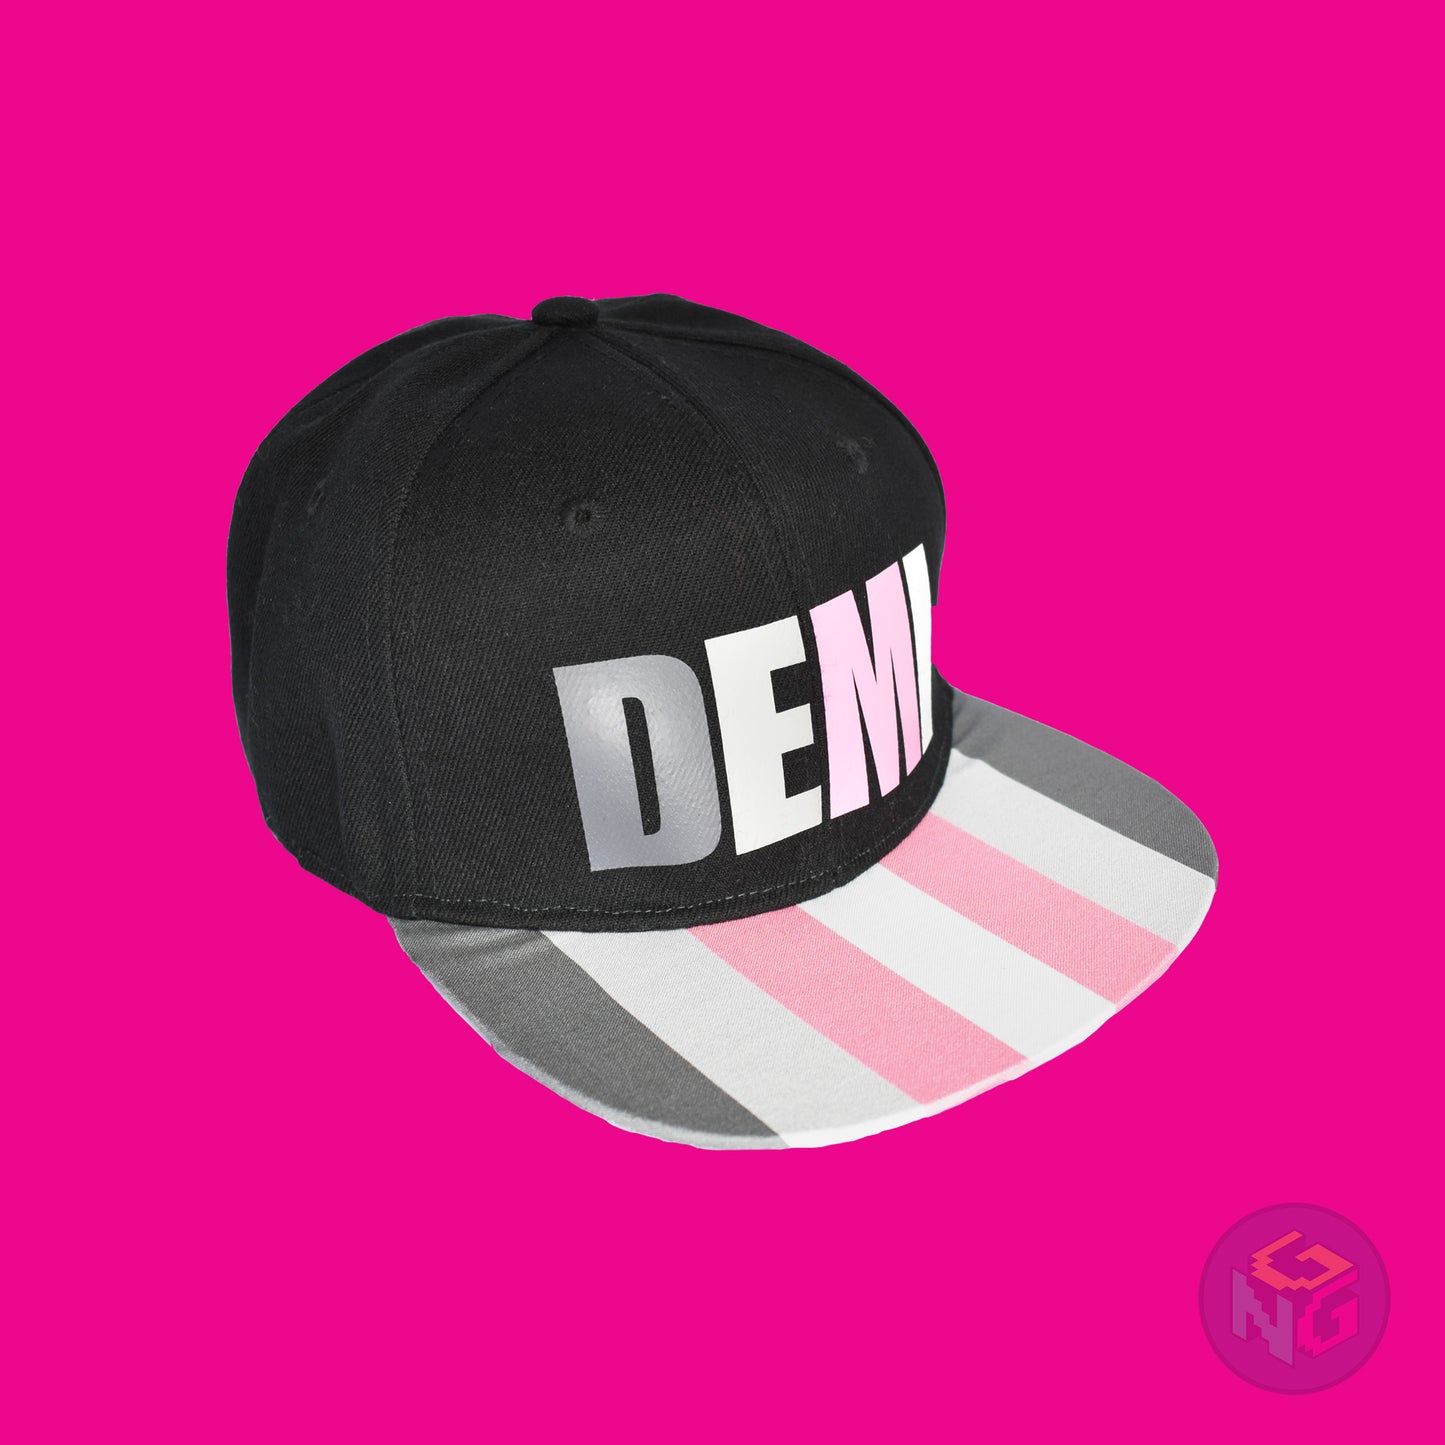 Black flat bill snapback hat. The brim has the demigirl pride flag on both sides and the front of the hat has the word “DEMI” in dark grey, light grey, pink, and white. Front right view